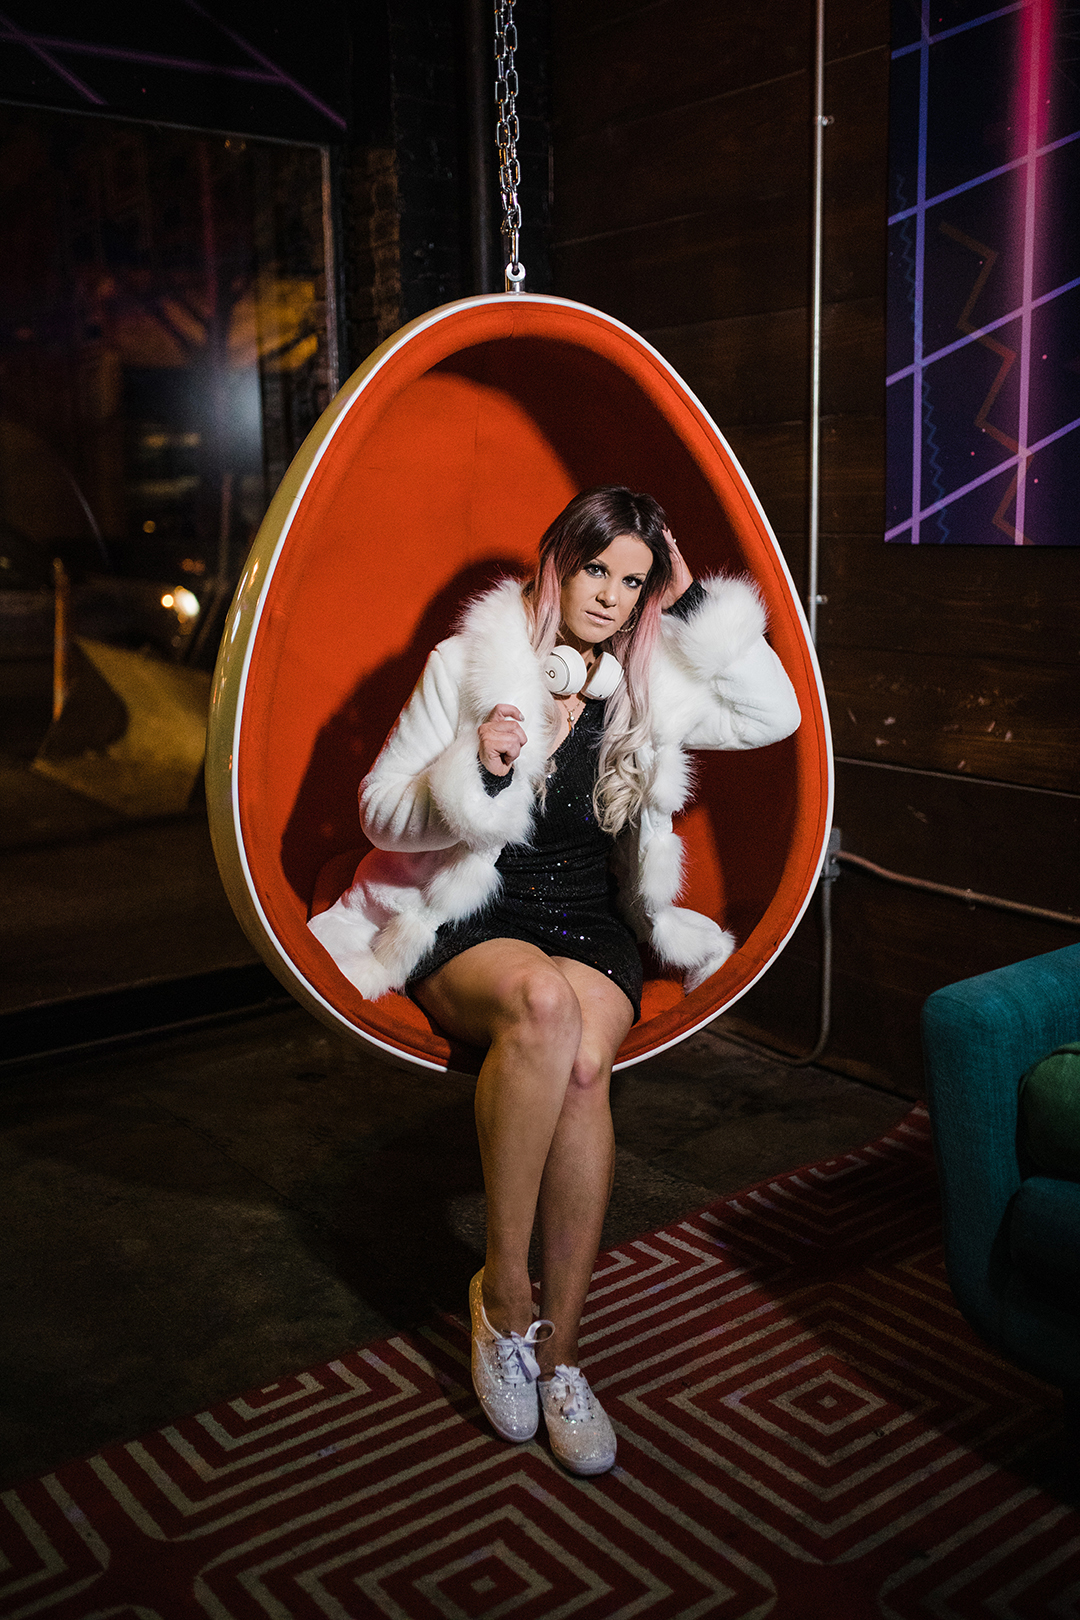 Dallas Fort Worth DJ Photographer; a woman with pink hair highlights wearing sparkly shoes, short black dress, white jacket, and headphones around her neck sitting in a hanging egg-shaped chair in a downtown bar